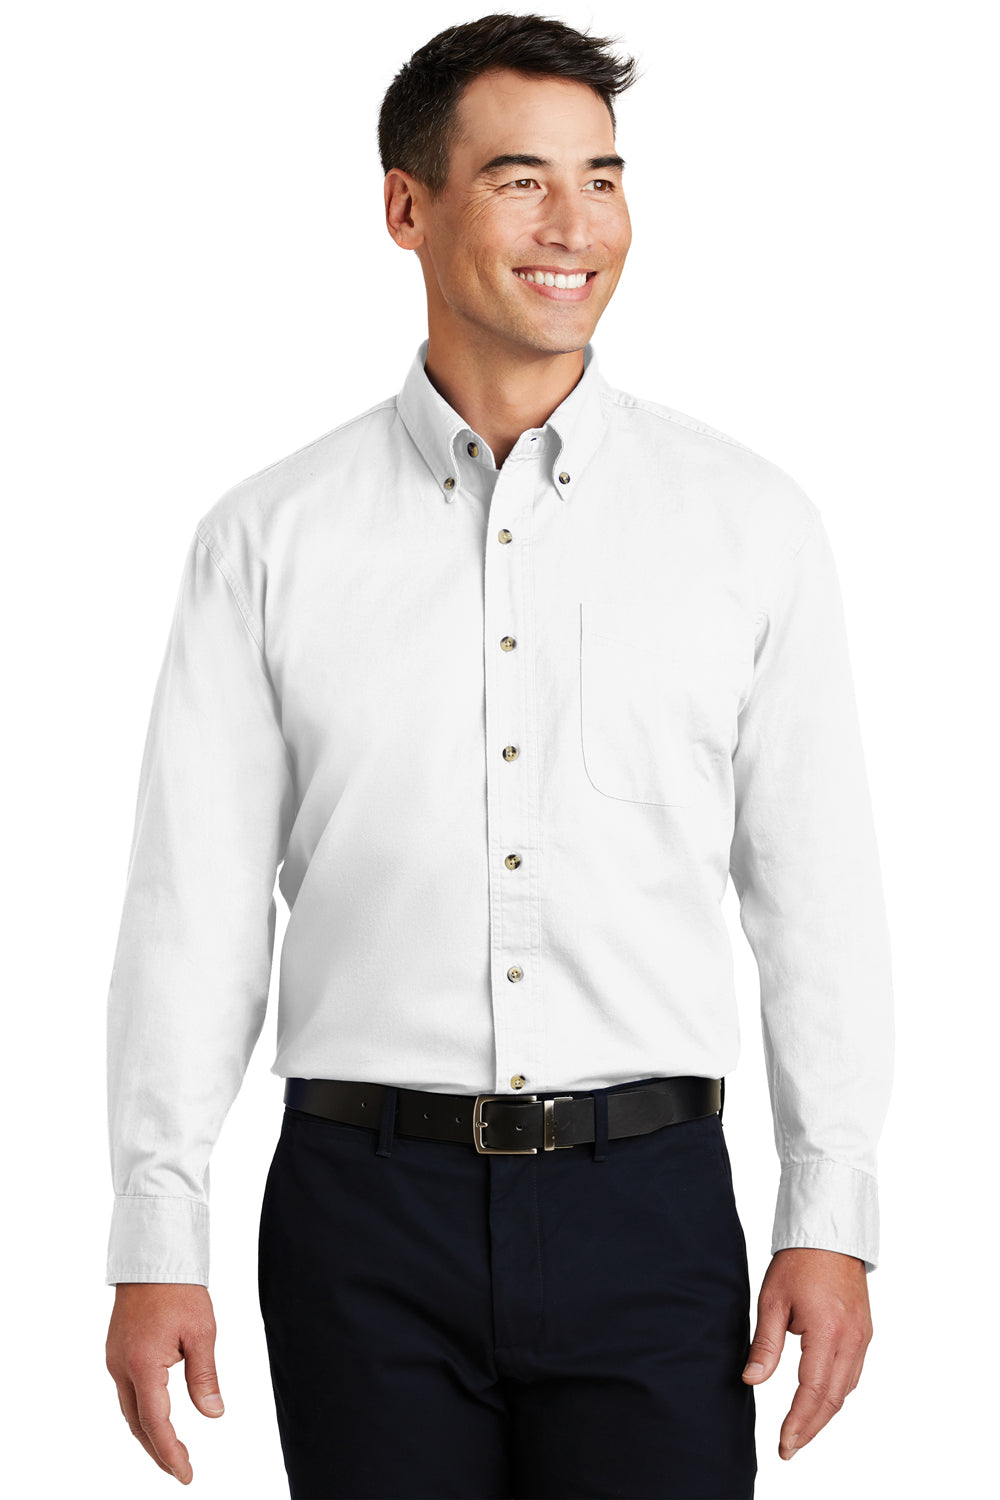 Port Authority S600T Mens Long Sleeve Button Down Shirt w/ Pocket White Front